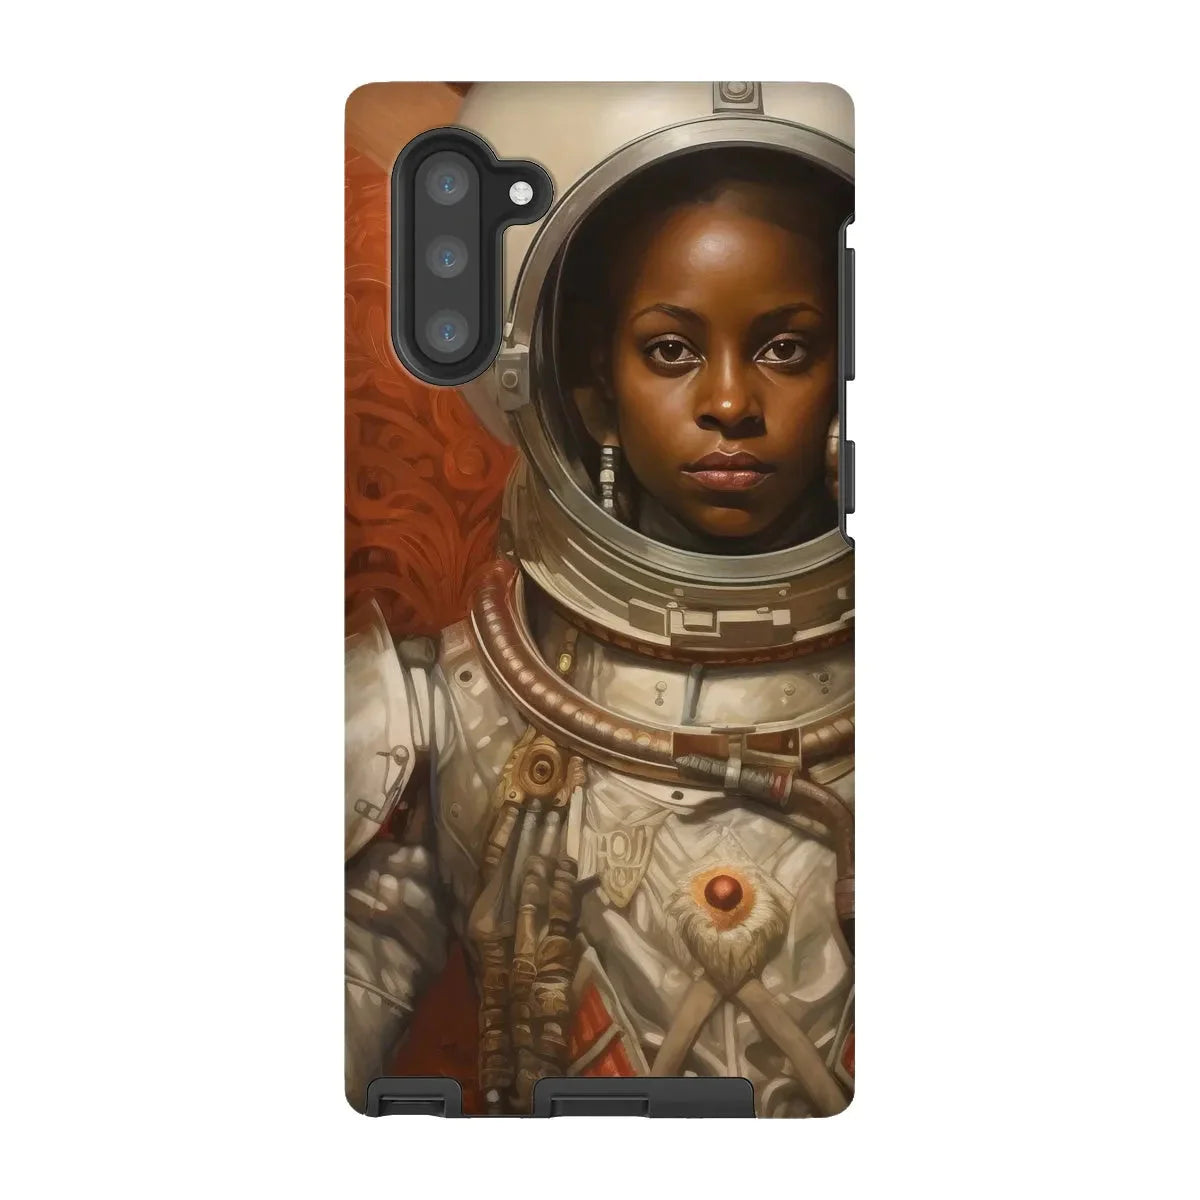 Ava The Lesbian Astronaut - Sapphic Aesthetic Phone Case - Samsung Galaxy Note 10 / Matte - Mobile Phone Cases